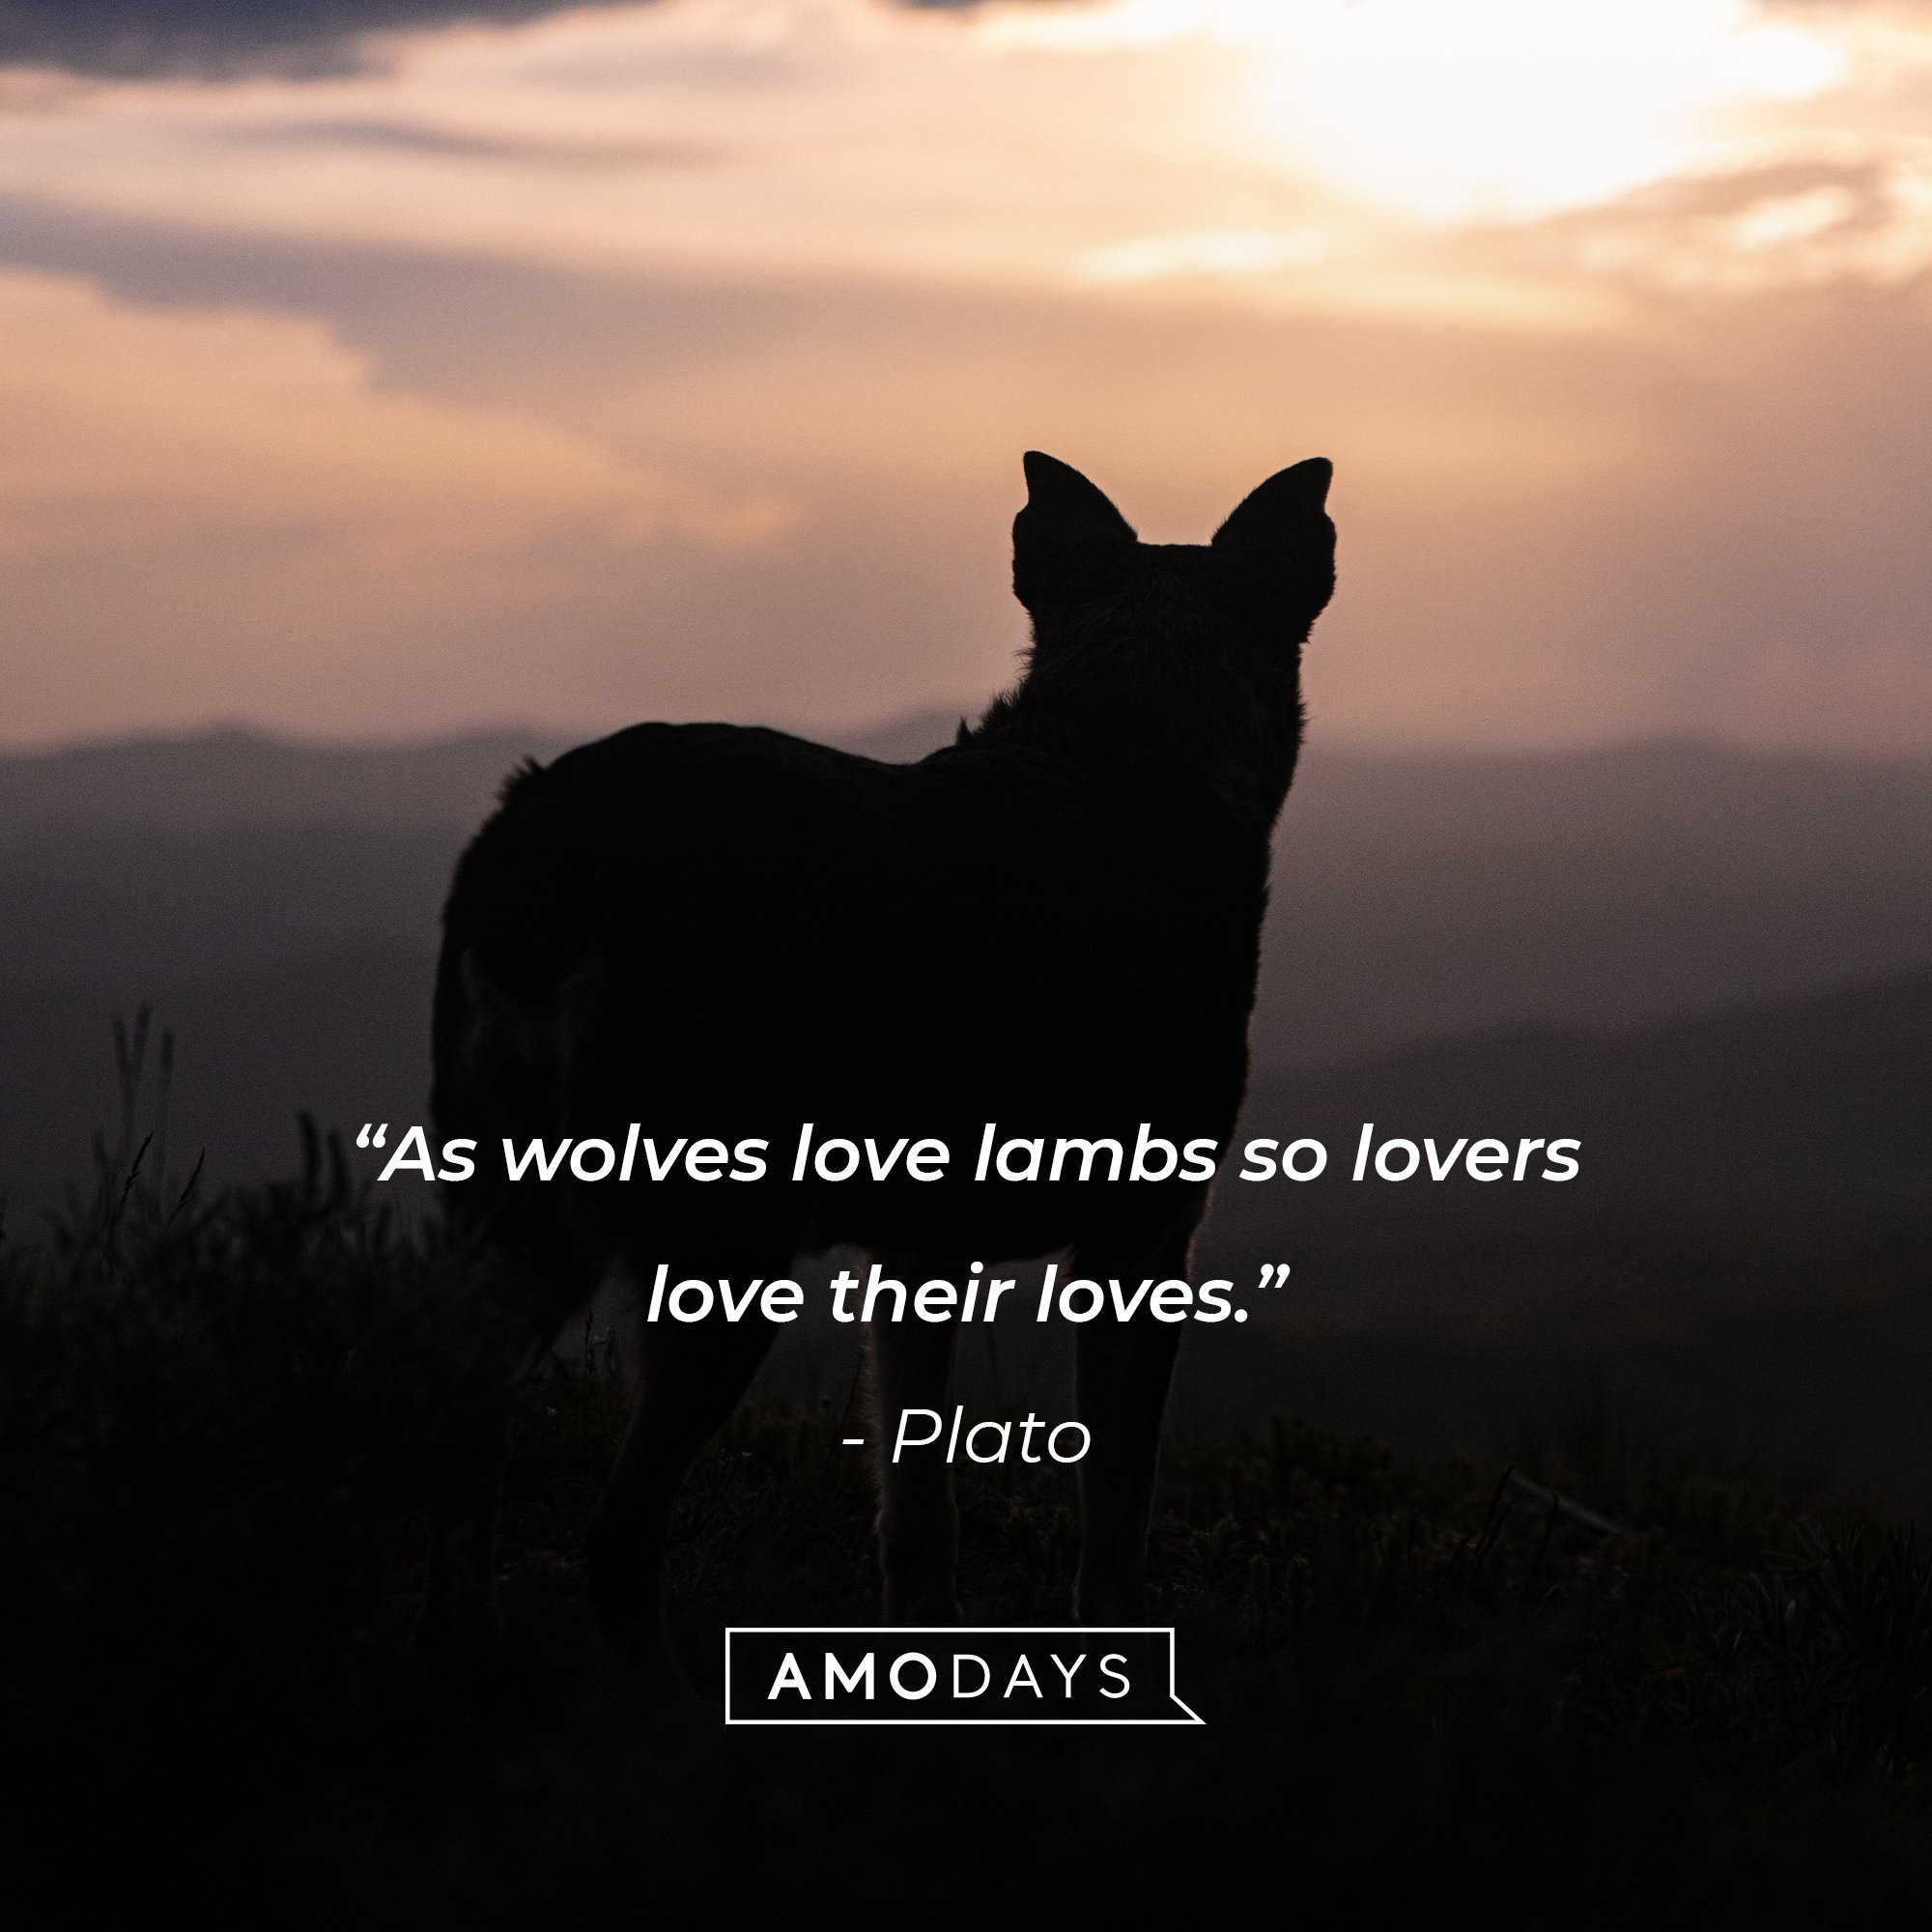  Plato's quote" “As wolves love lambs so lovers love their loves.” | Image: AmoDays